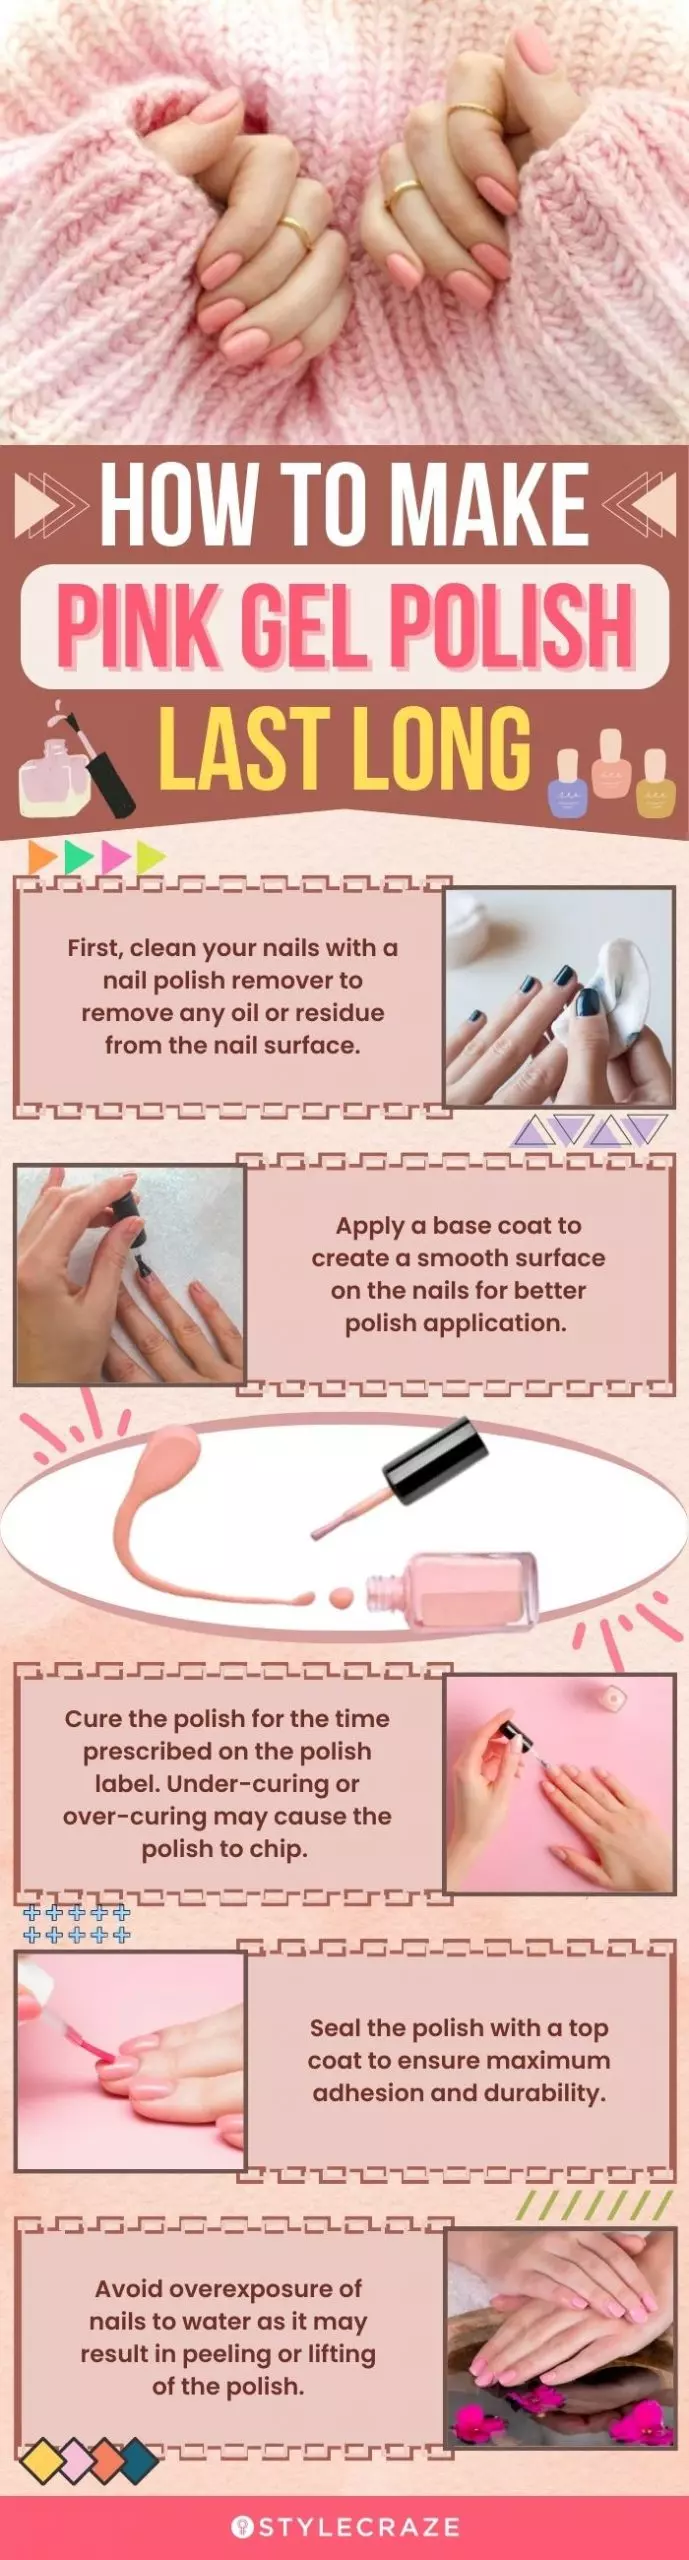 How To Make Pink Gel Polish Last Long (infographic)